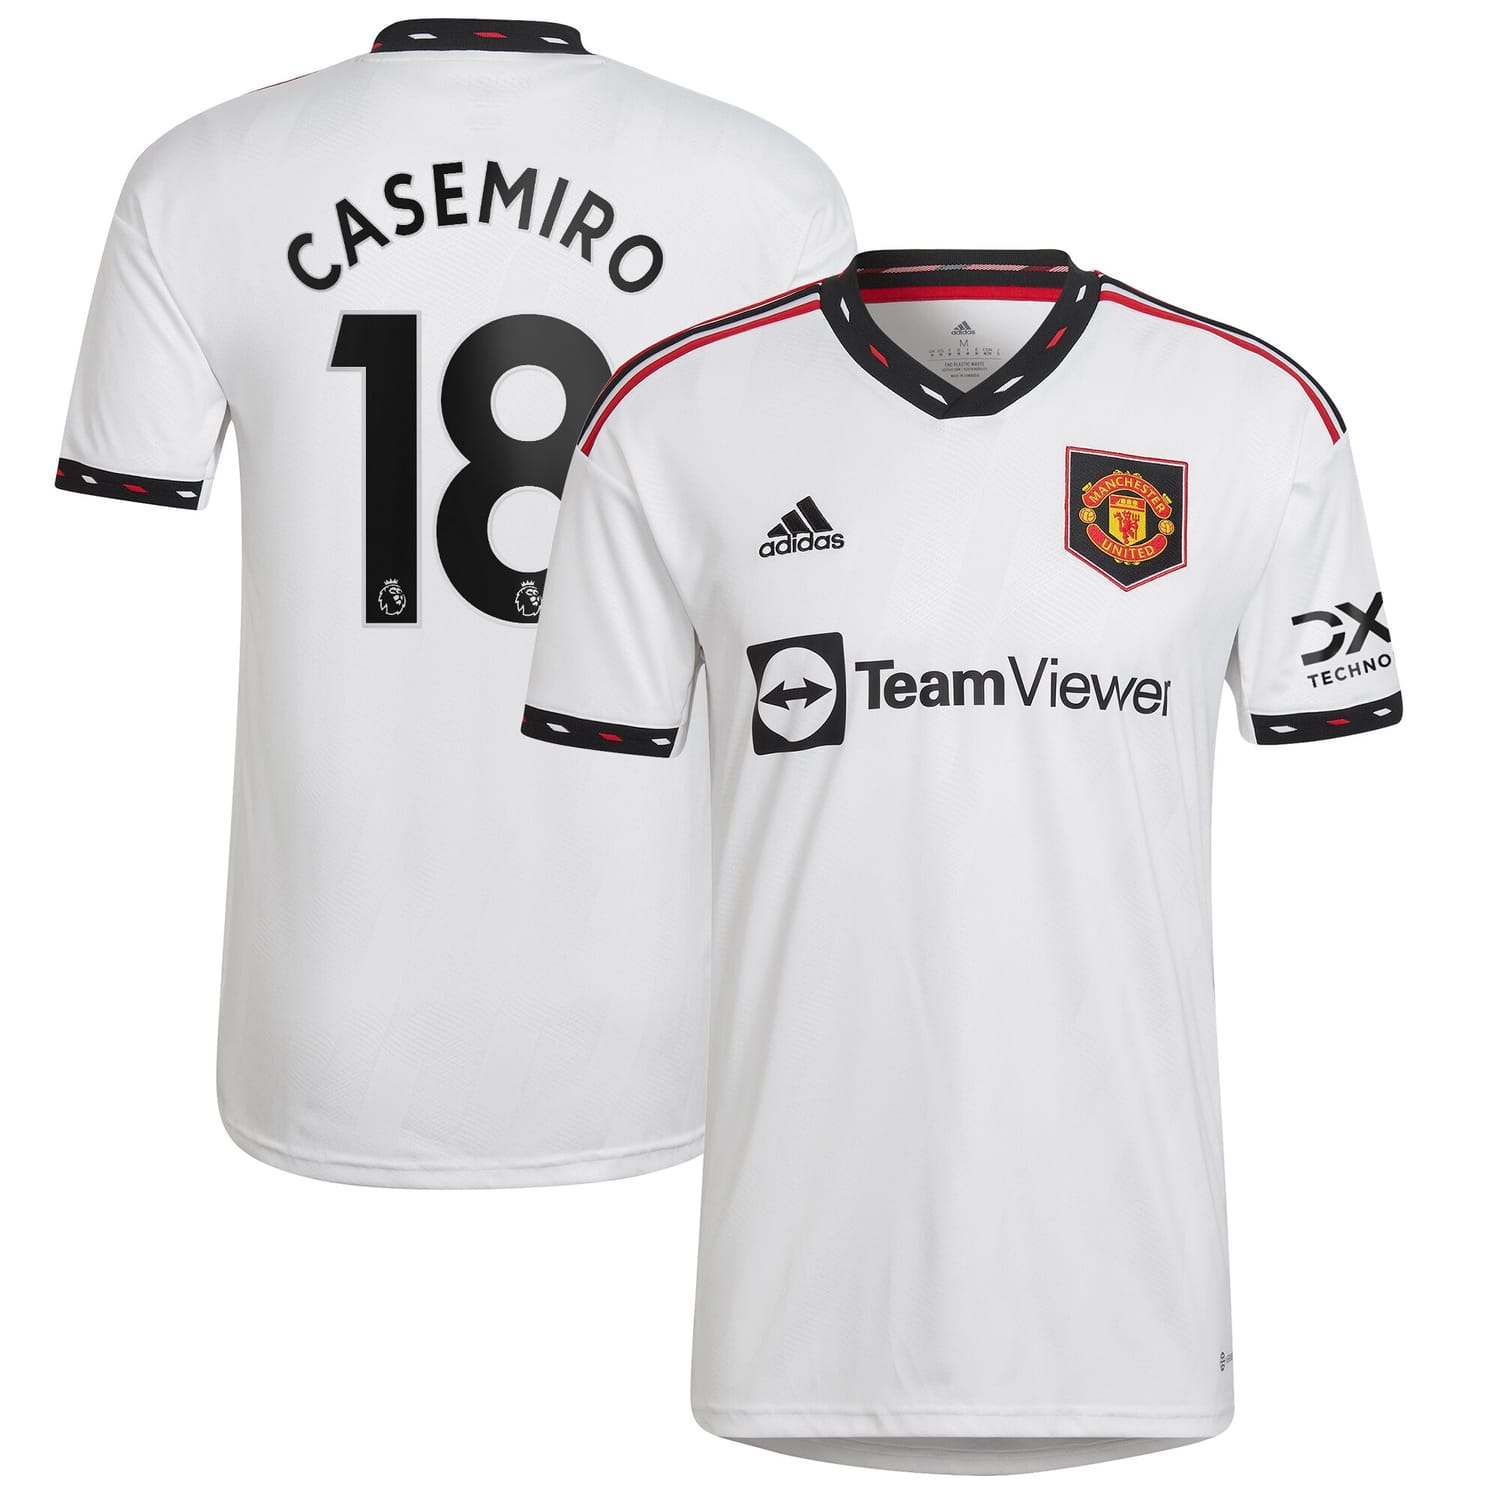 Premier League Manchester United Away Jersey Shirt White 2022-23 player Casemiro printing for Men